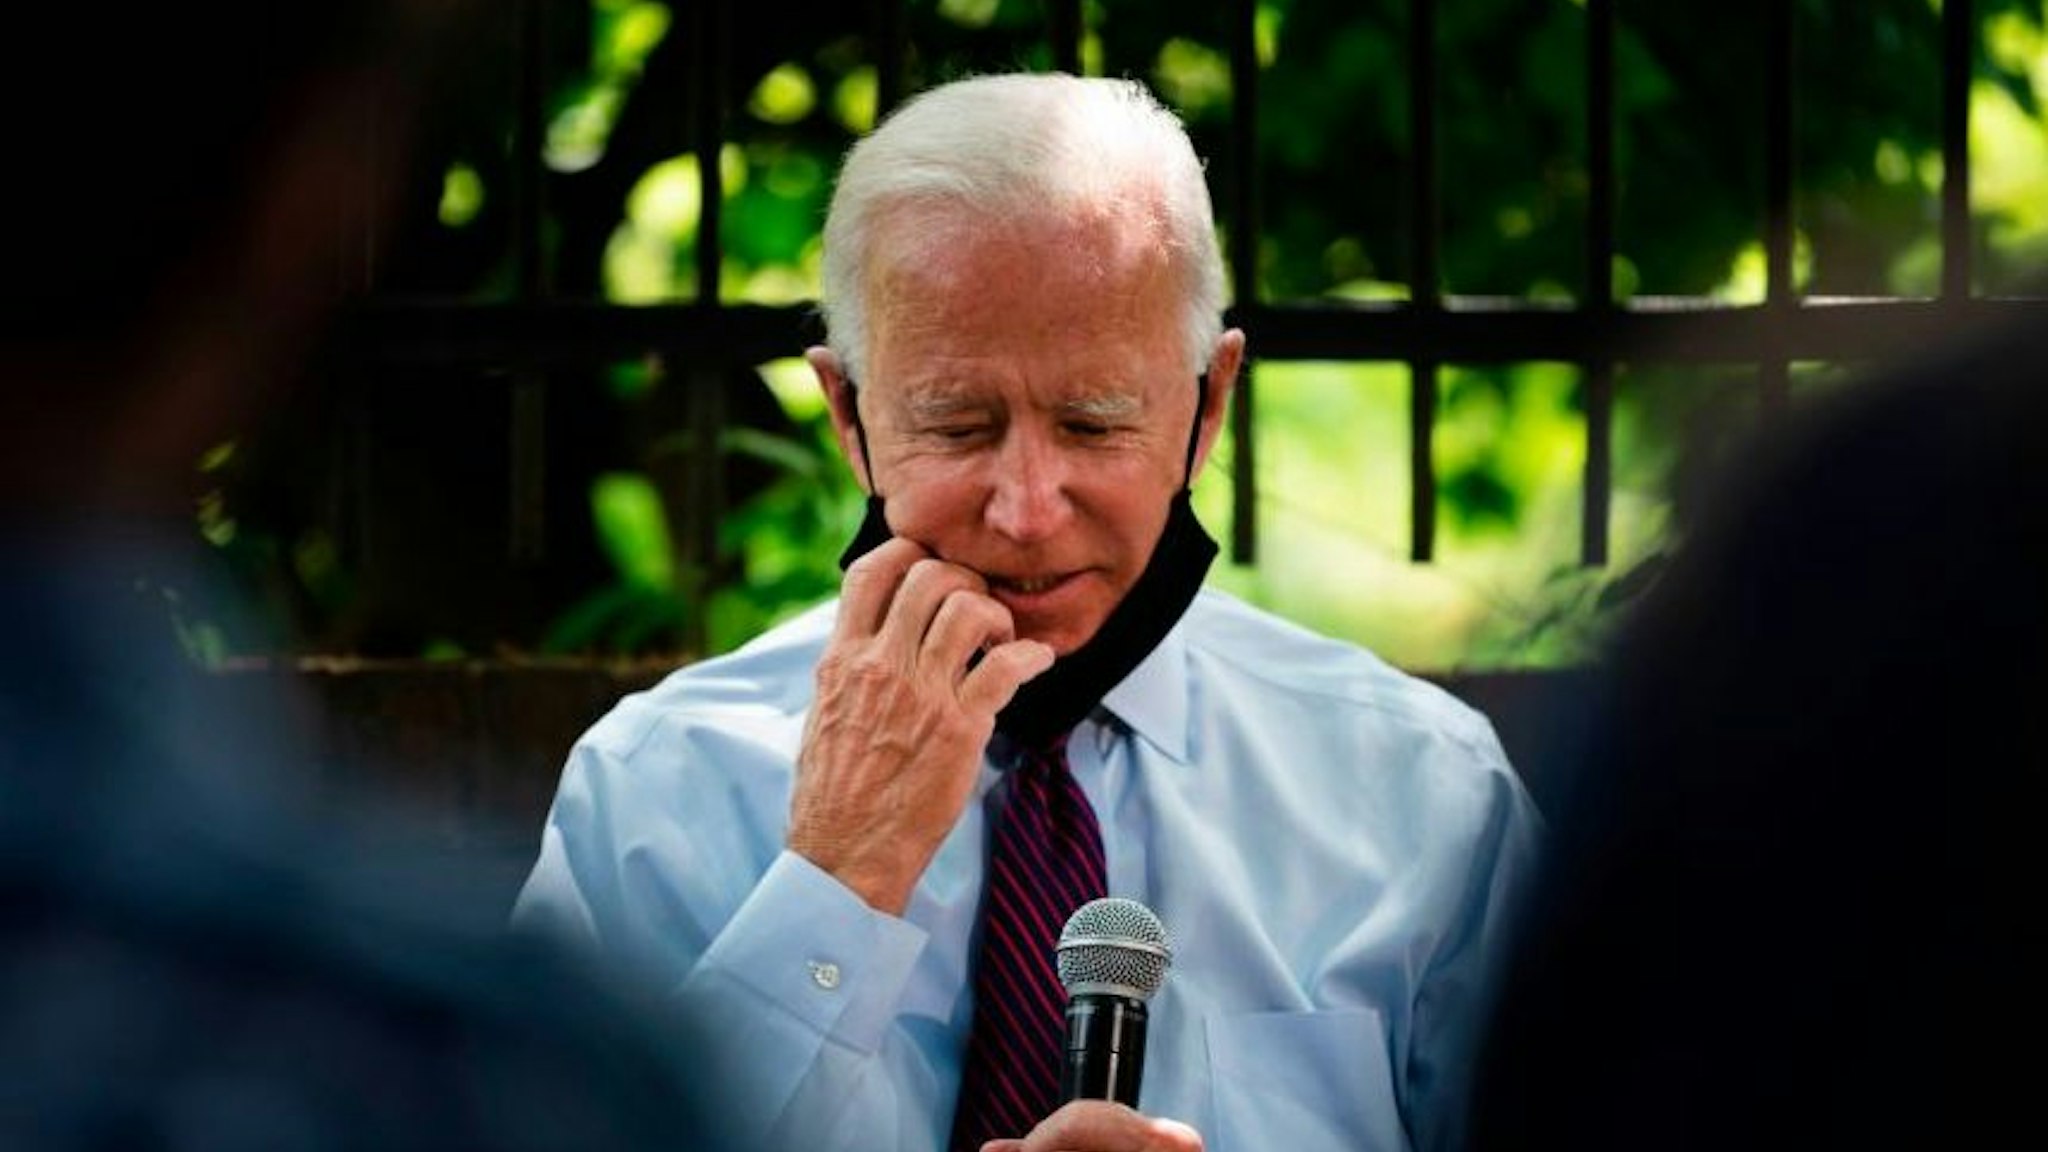 Democratic presidential candidate Joe Biden adjusts his facemask as he meets with Pennsylvania families who have benefited from the Affordable Care Act on June 25, 2020 in Lancaster, Pennsylvania.